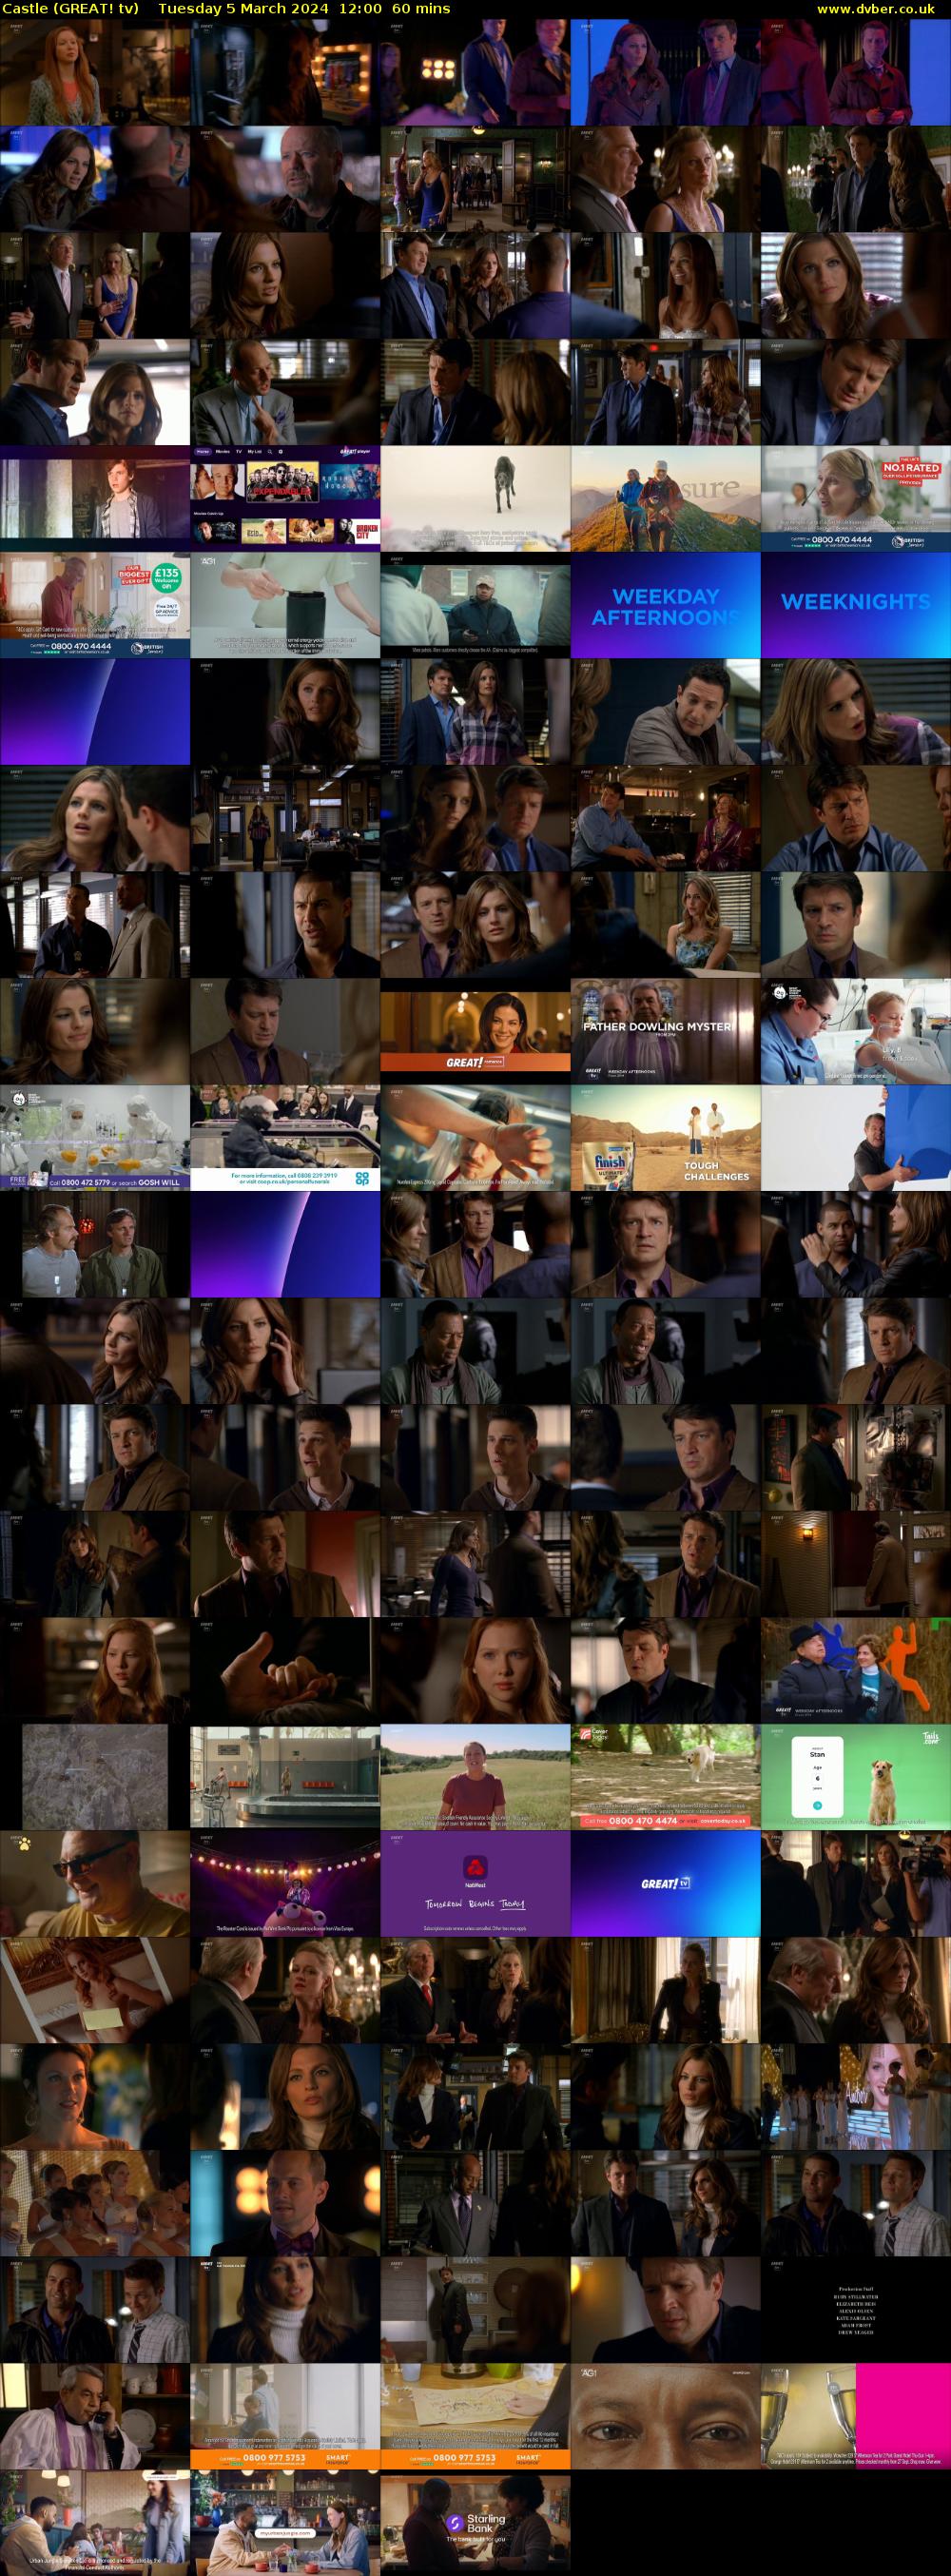 Castle (GREAT! tv) Tuesday 5 March 2024 12:00 - 13:00